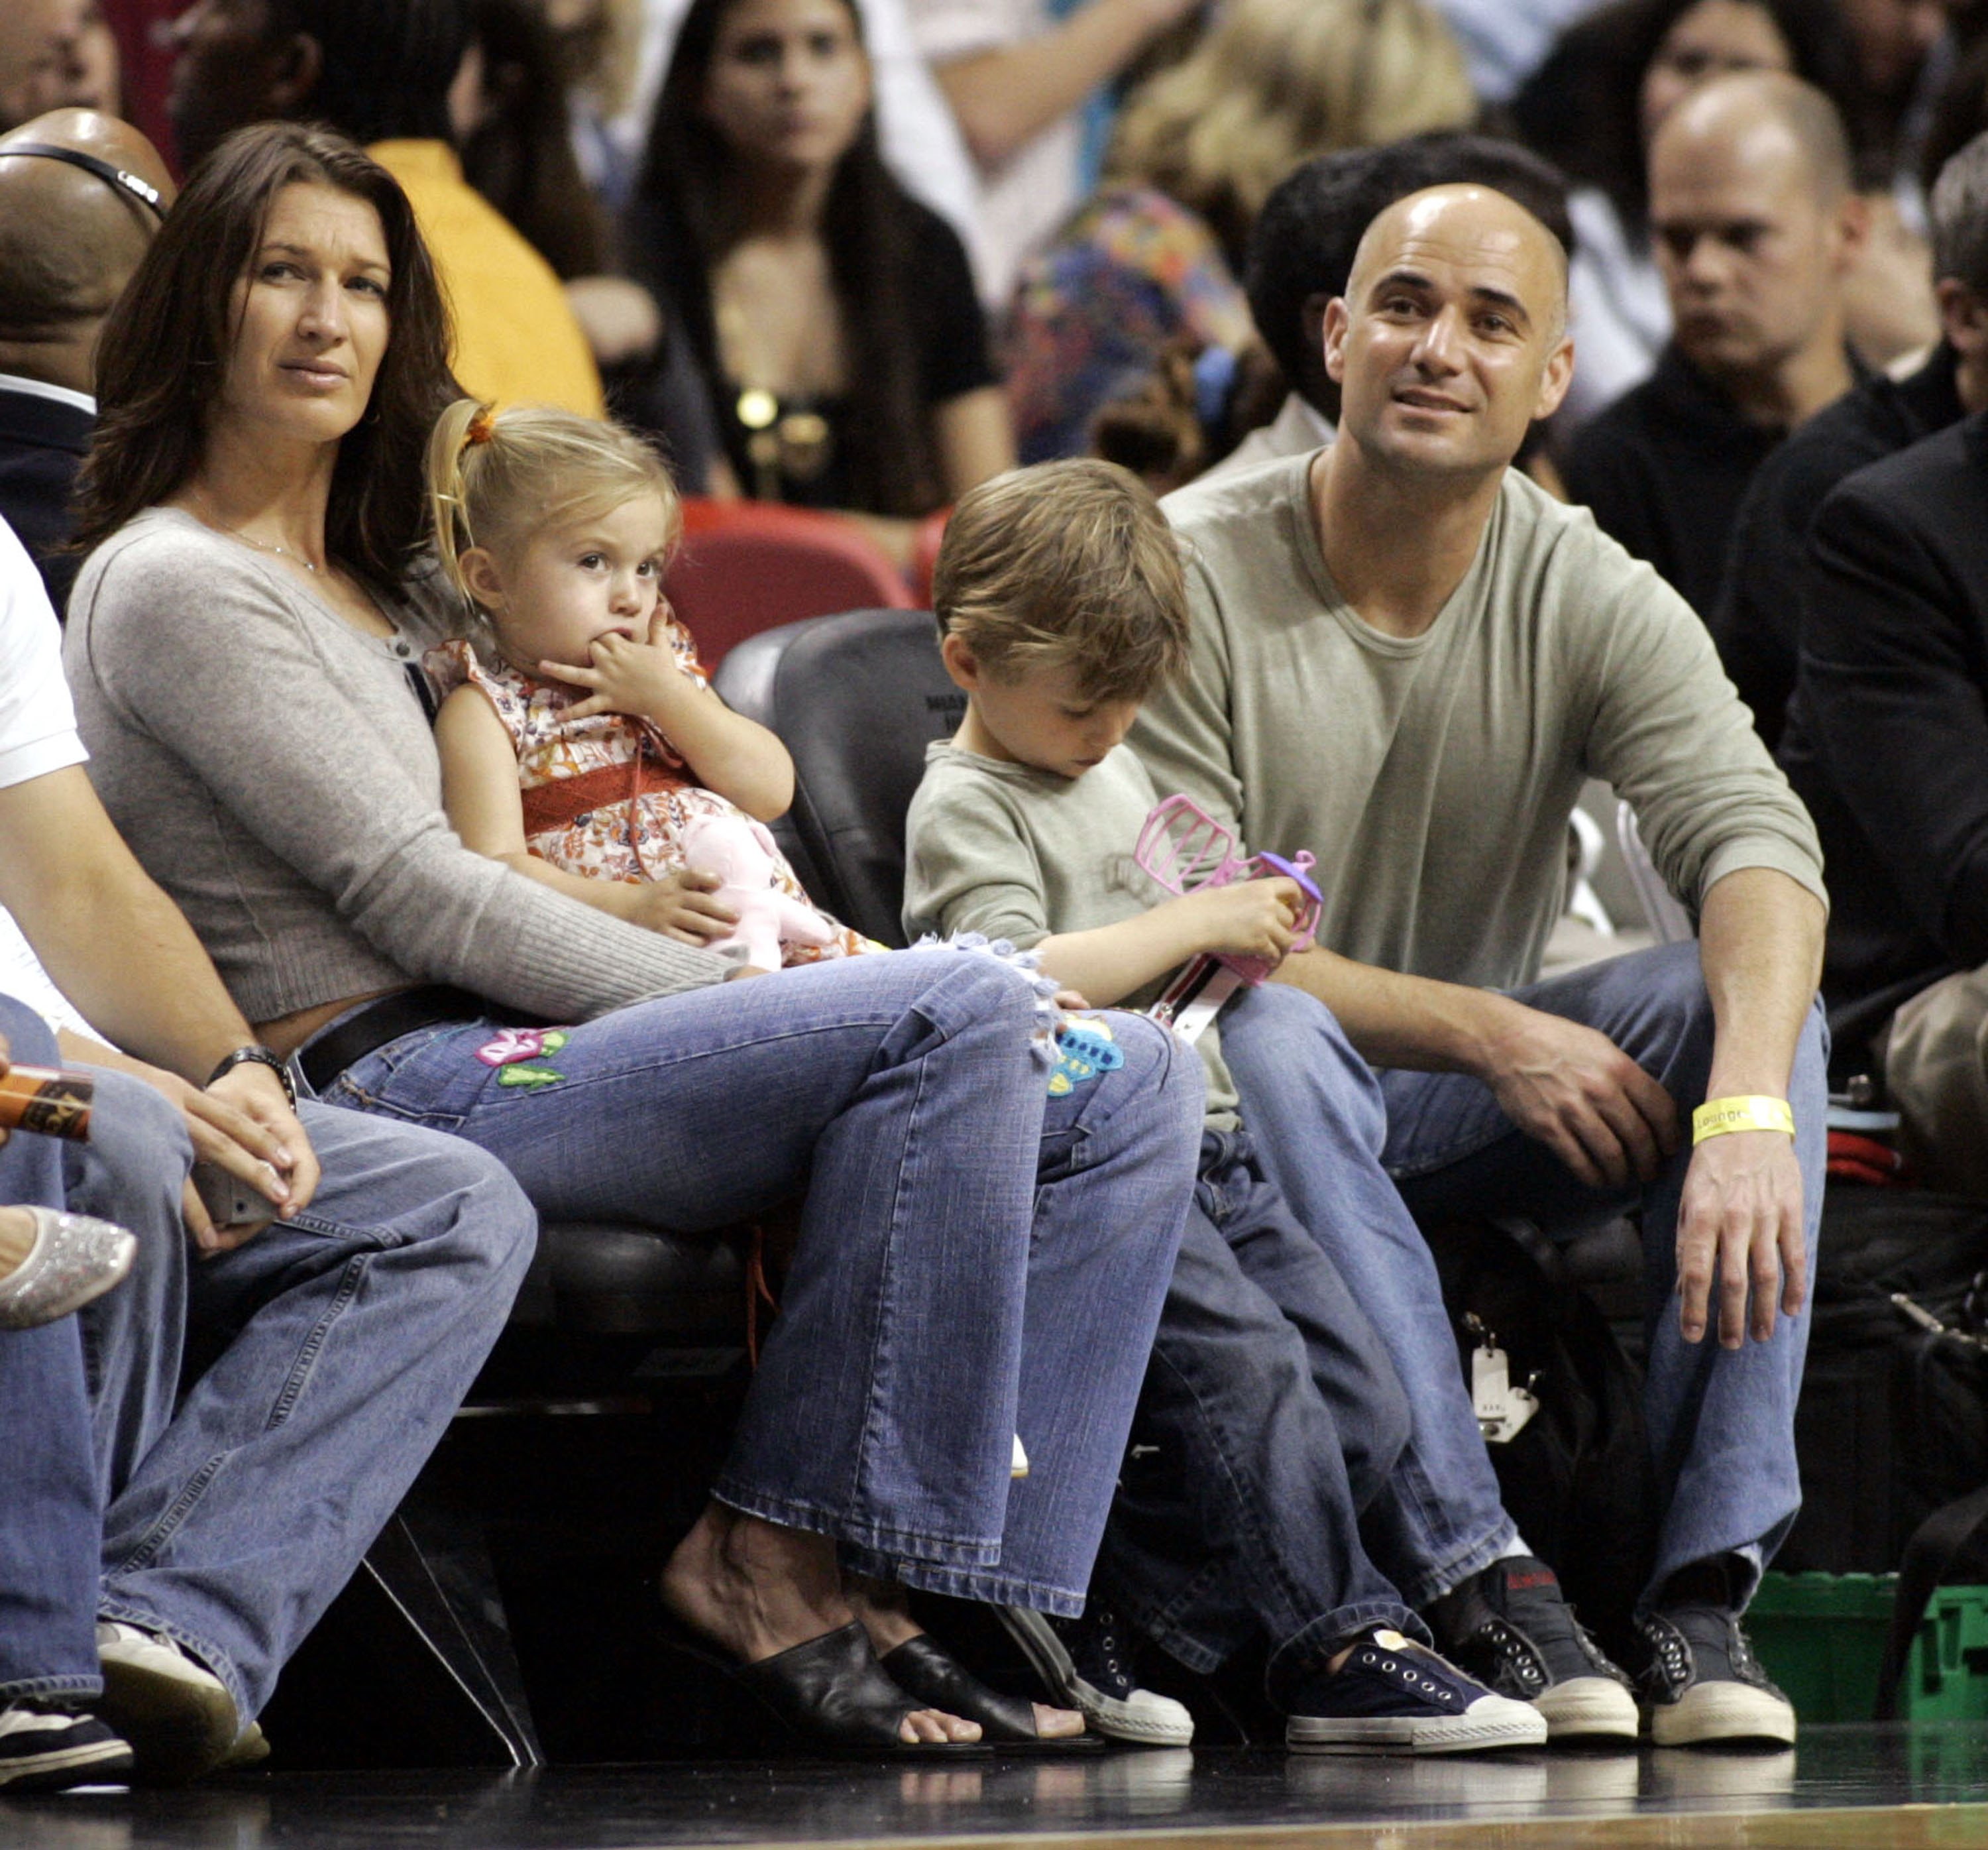 Steffi Graf and Andre Agassi with their children Jaz Elle and Jaden, watch the game between Sacramento Kings and Miami Heat at the American Airlines Arena on January 22, 2006, in Miami, Florida. | Source: Getty Images